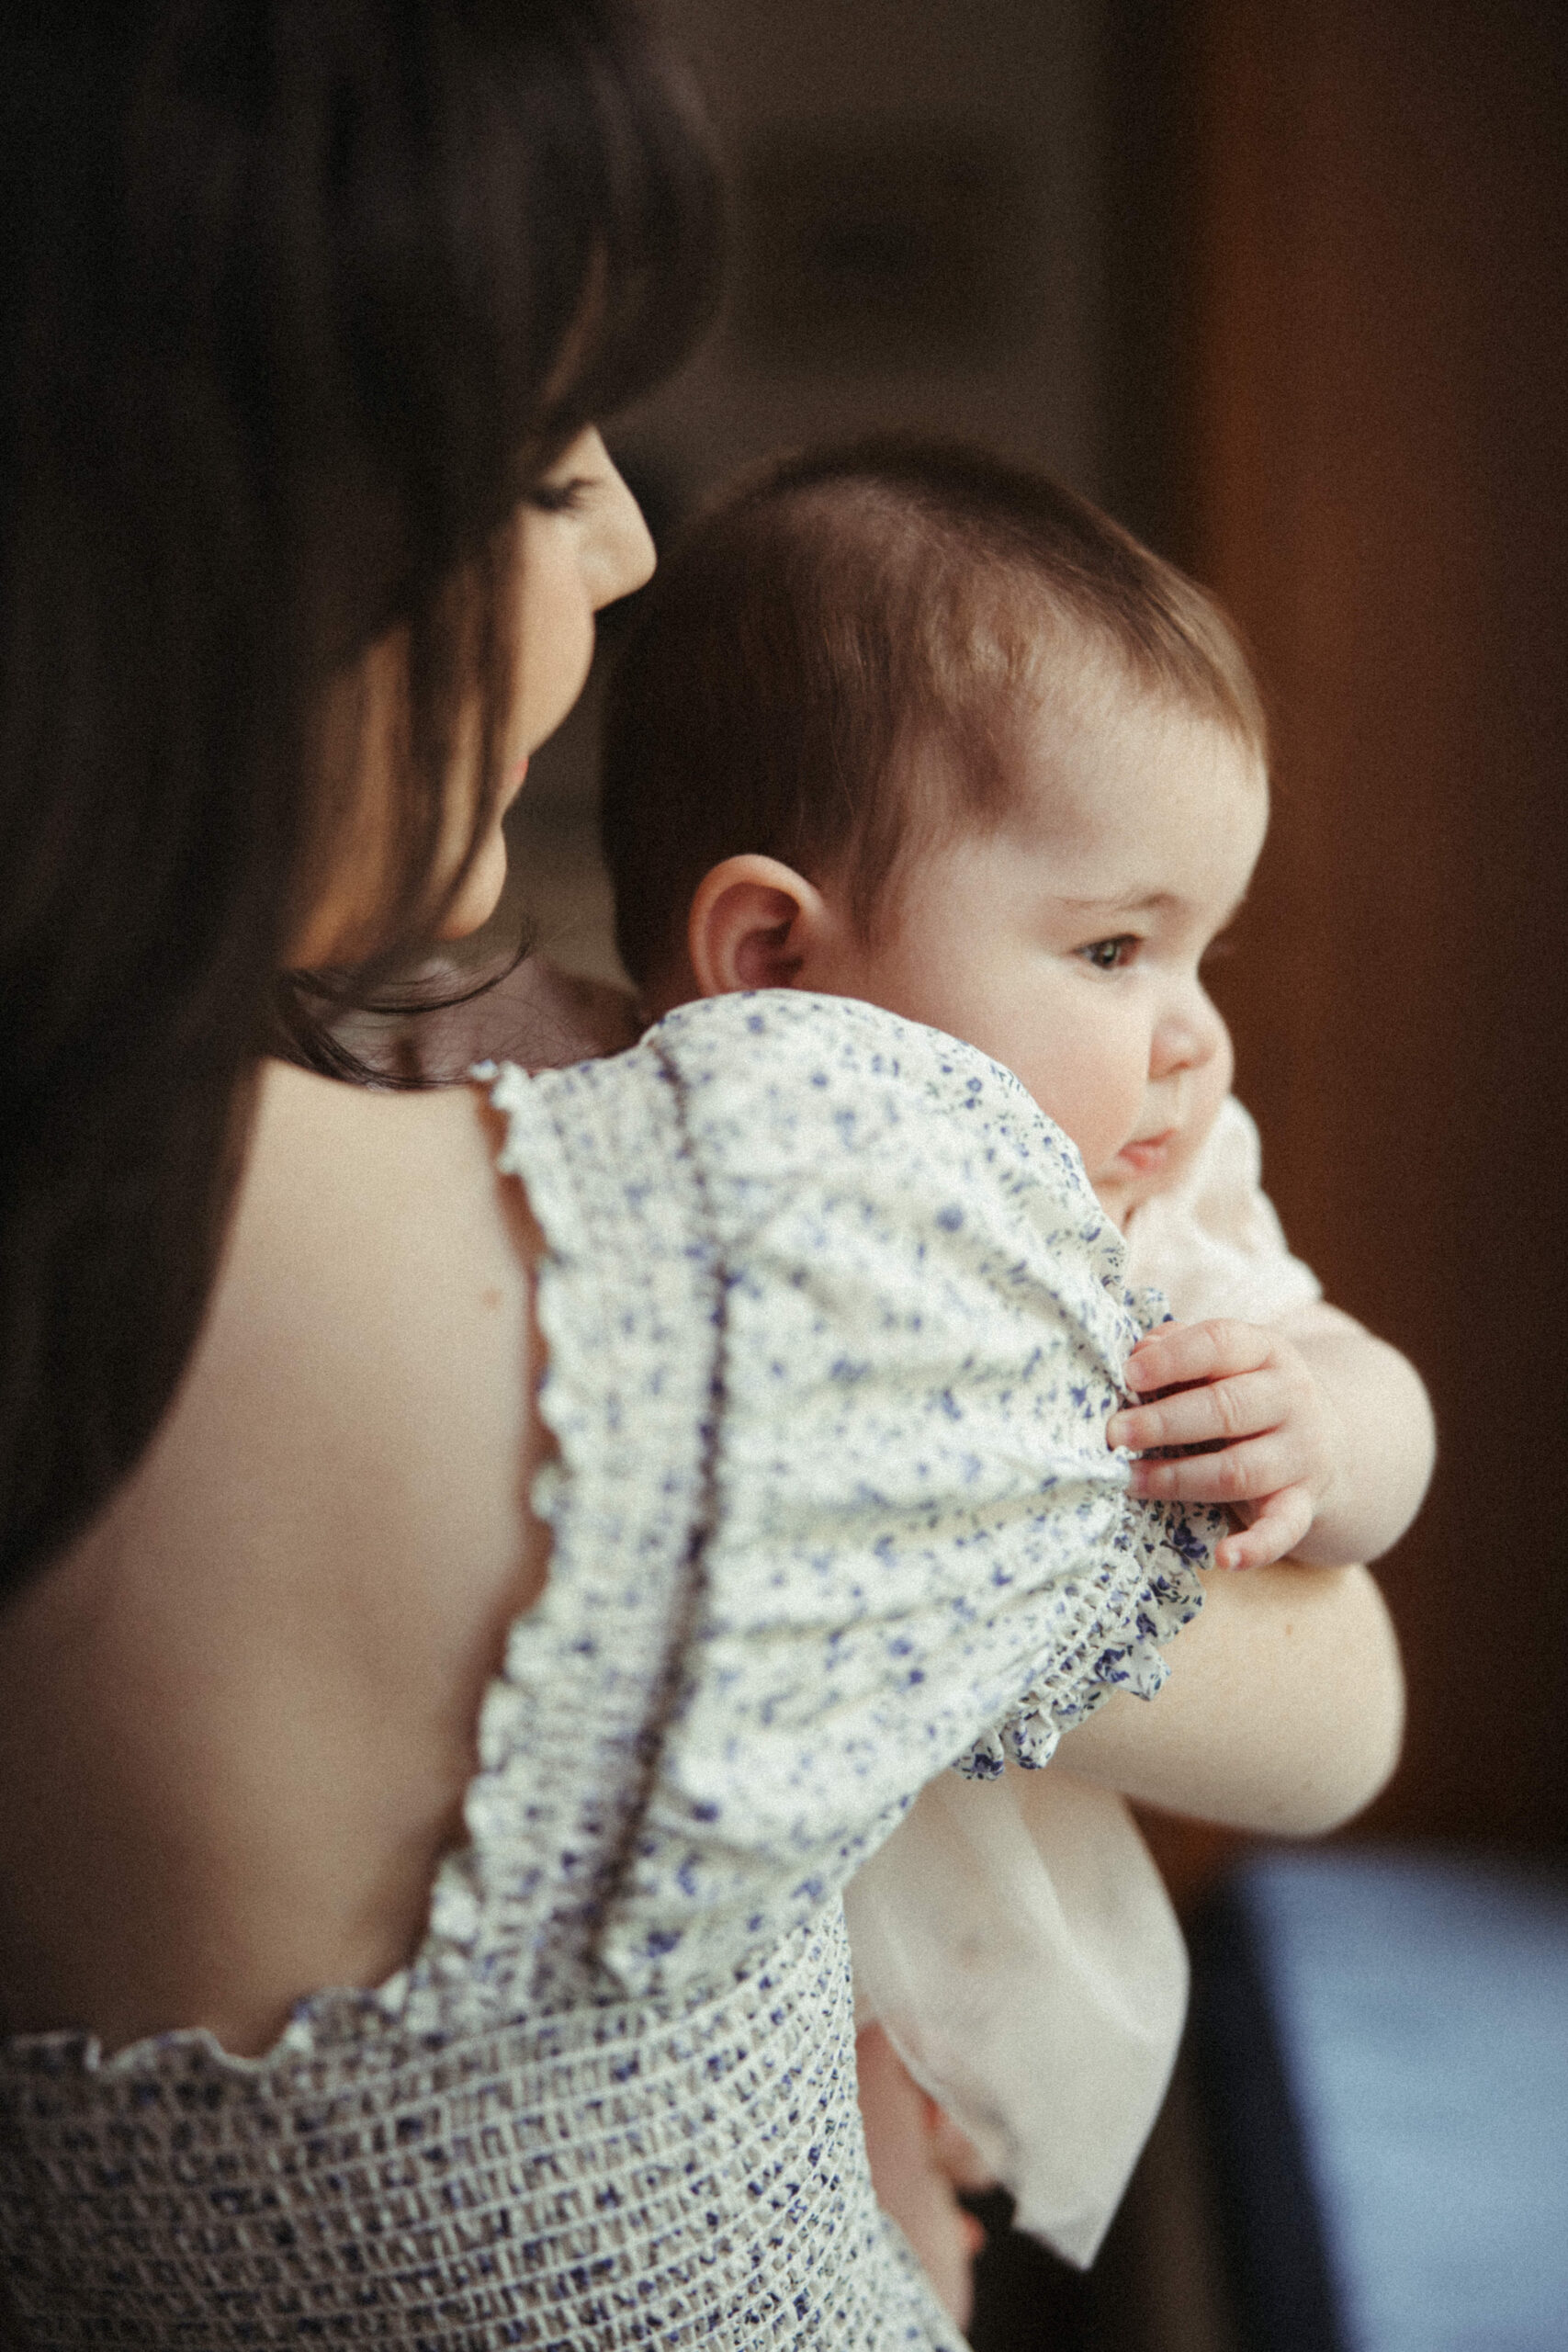 intimate photo of mom and infant daughter together during their in home photo session